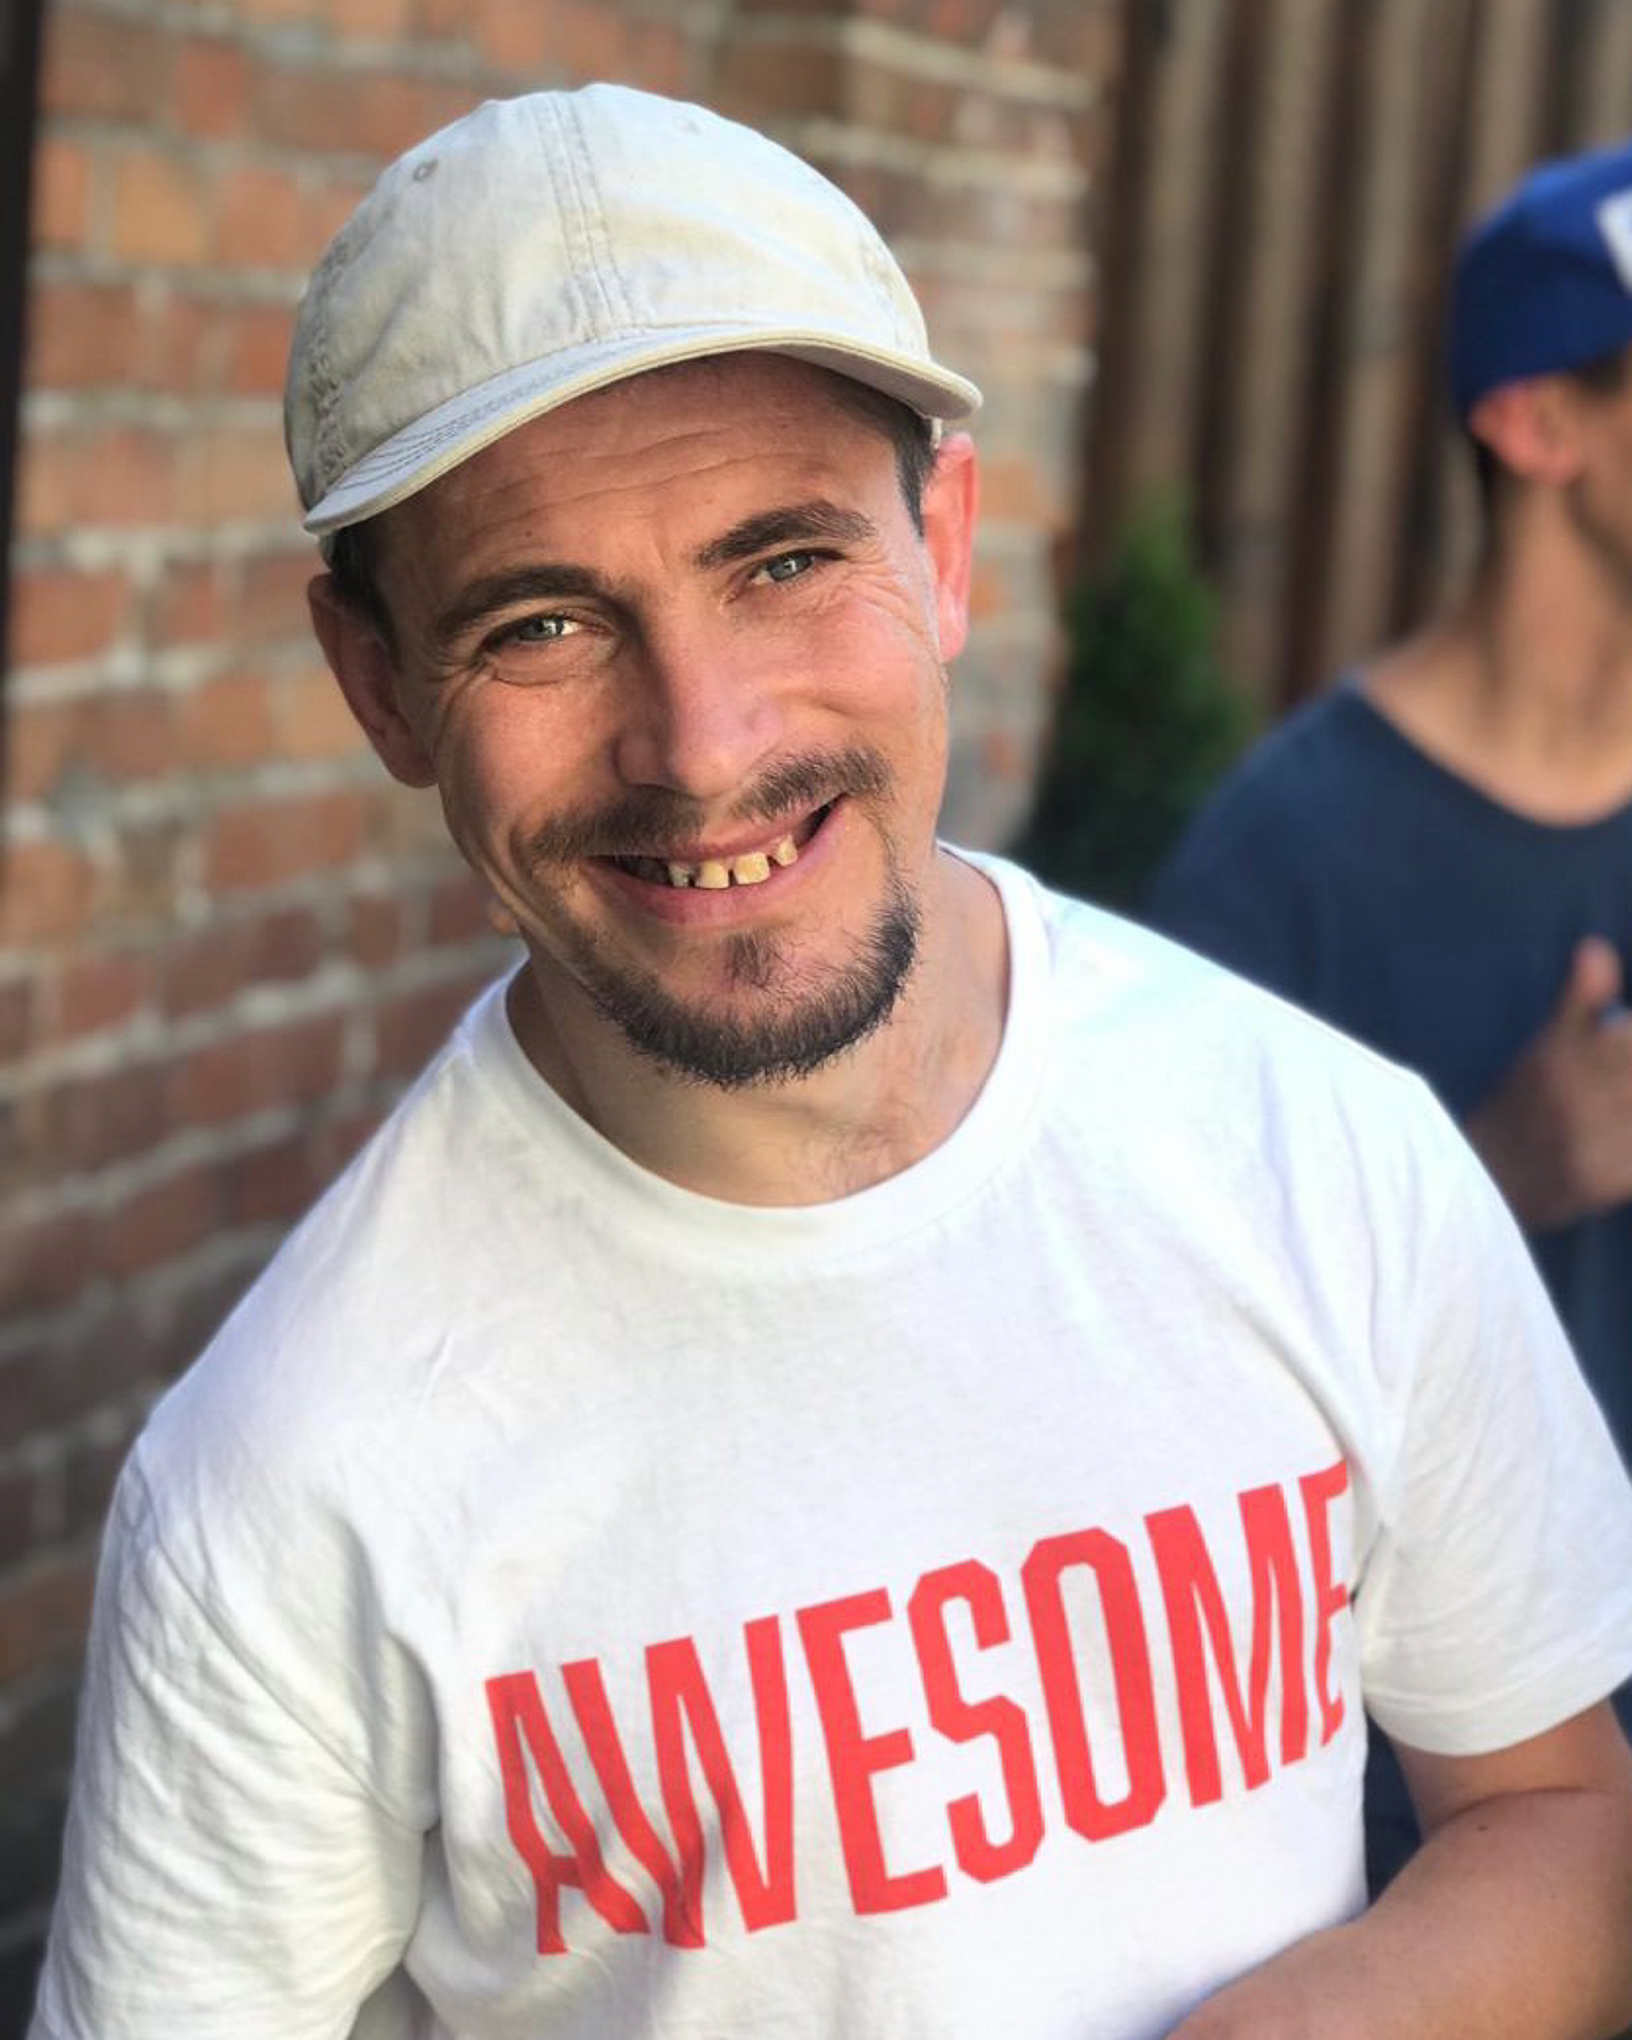 A special needs young man in his early 20's smiles wearing a white shirt with "awesome" written on it.